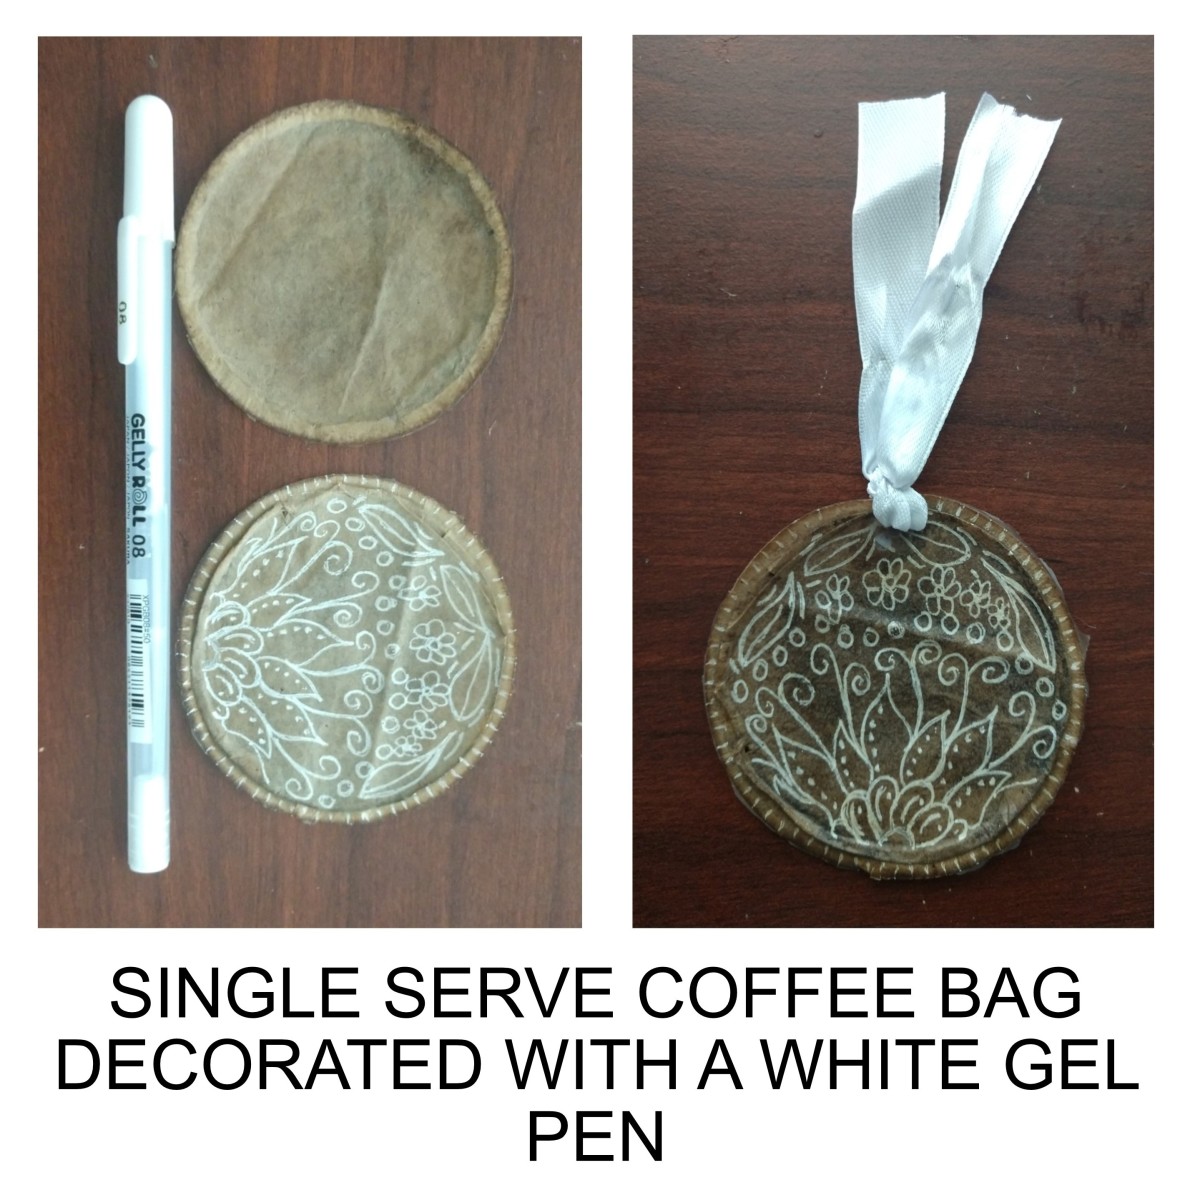 A single-serve coffee pouch. Treat the paper with the pasta starch first before decorating. It will prevent the pen ink from running. This is a pouch and the pasta starch will glue the front and back of the pouch together.